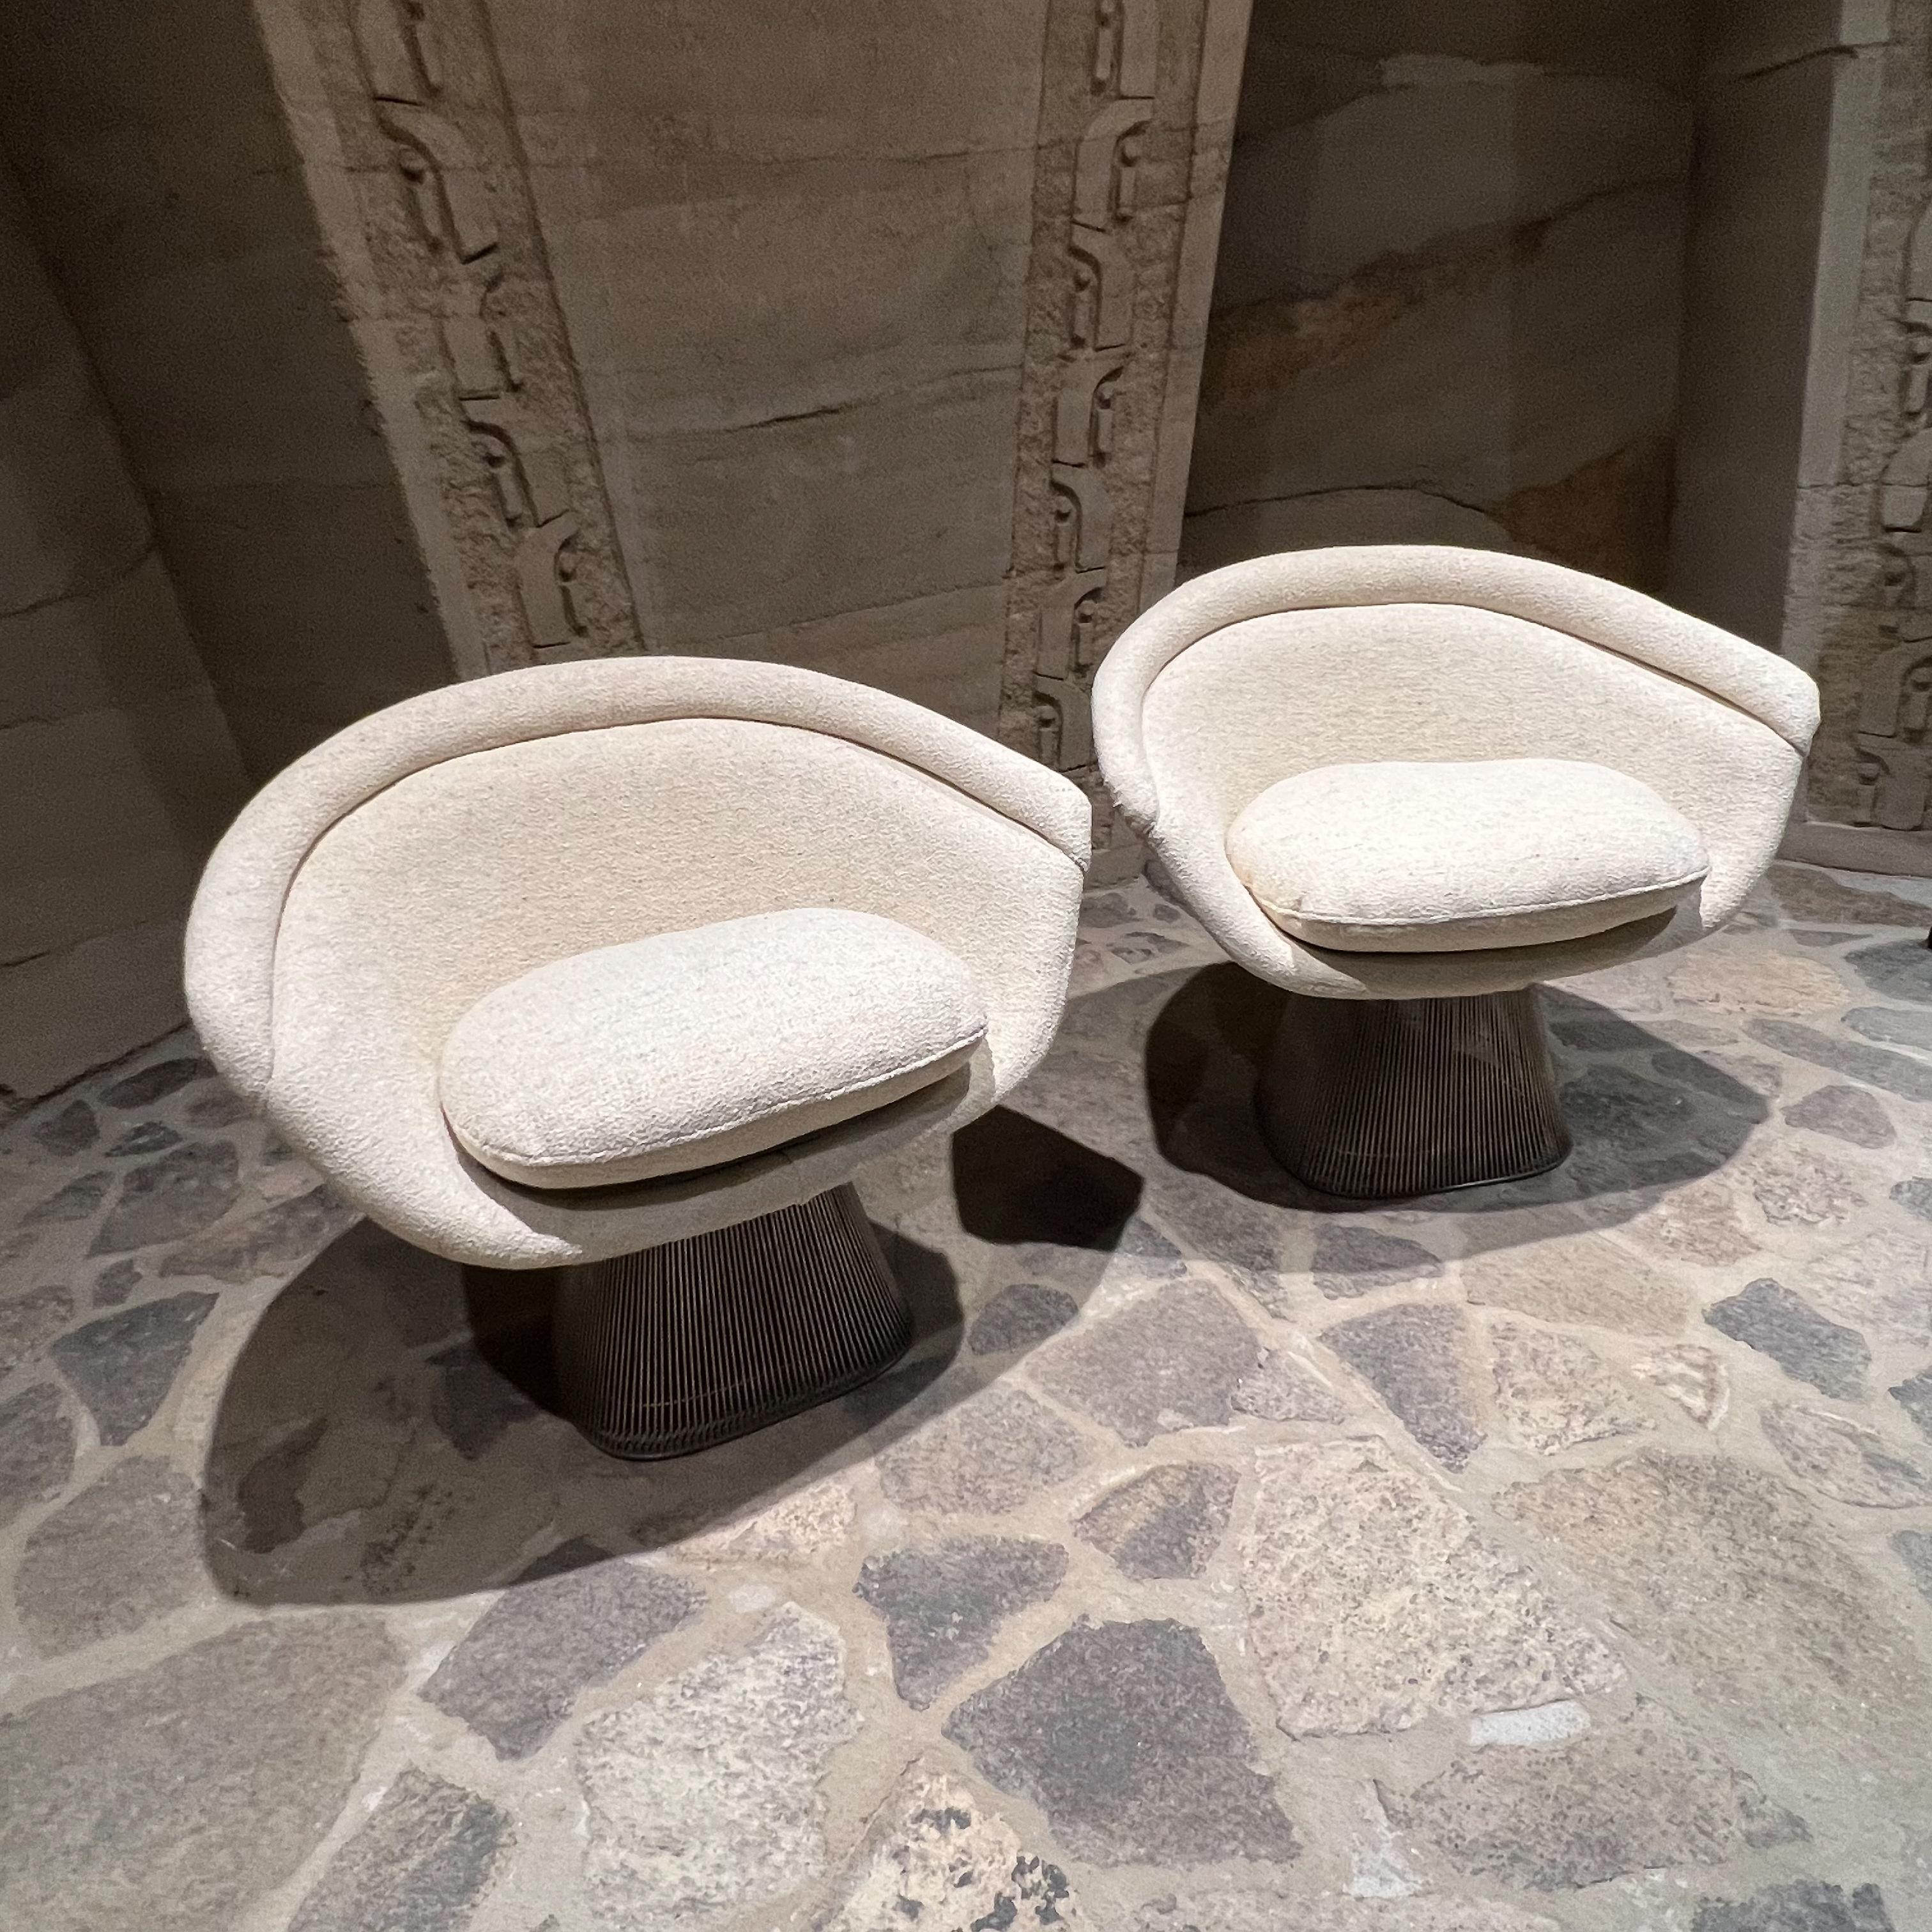 Low Lounge chairs
1970s Warren Platner stunning Off-white Low Lounge Chair Pair graceful metal frame.
Fabulous Metal design & fresh new upholstery
Very comfortable.
Unmarked
30.5 tall x 36 w x 25 d Seat 21
Preowned original vintage condition.